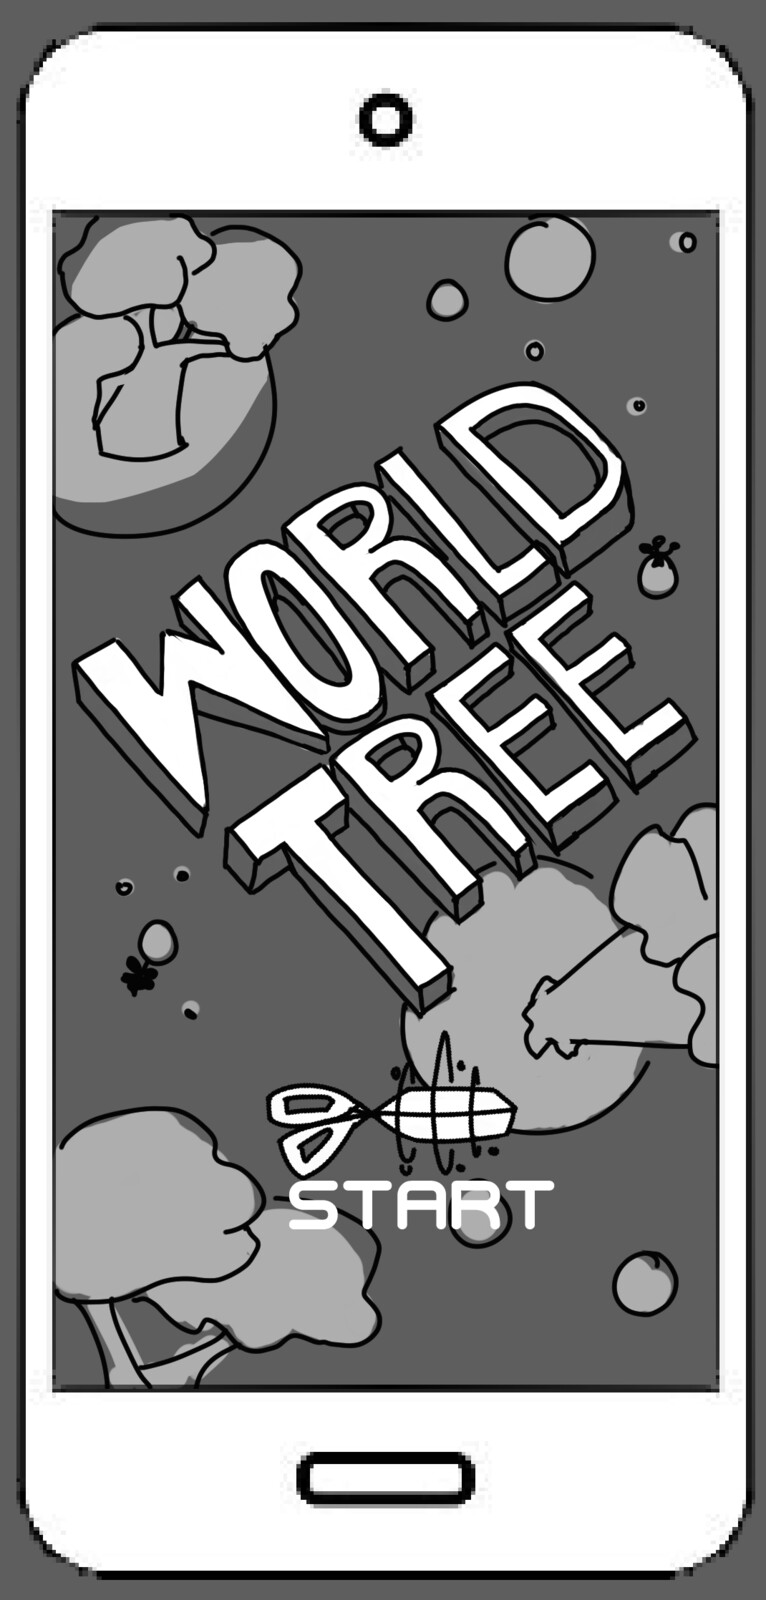 Start screen for World Tree, a tree pruning game where the Tree is as big as a planet